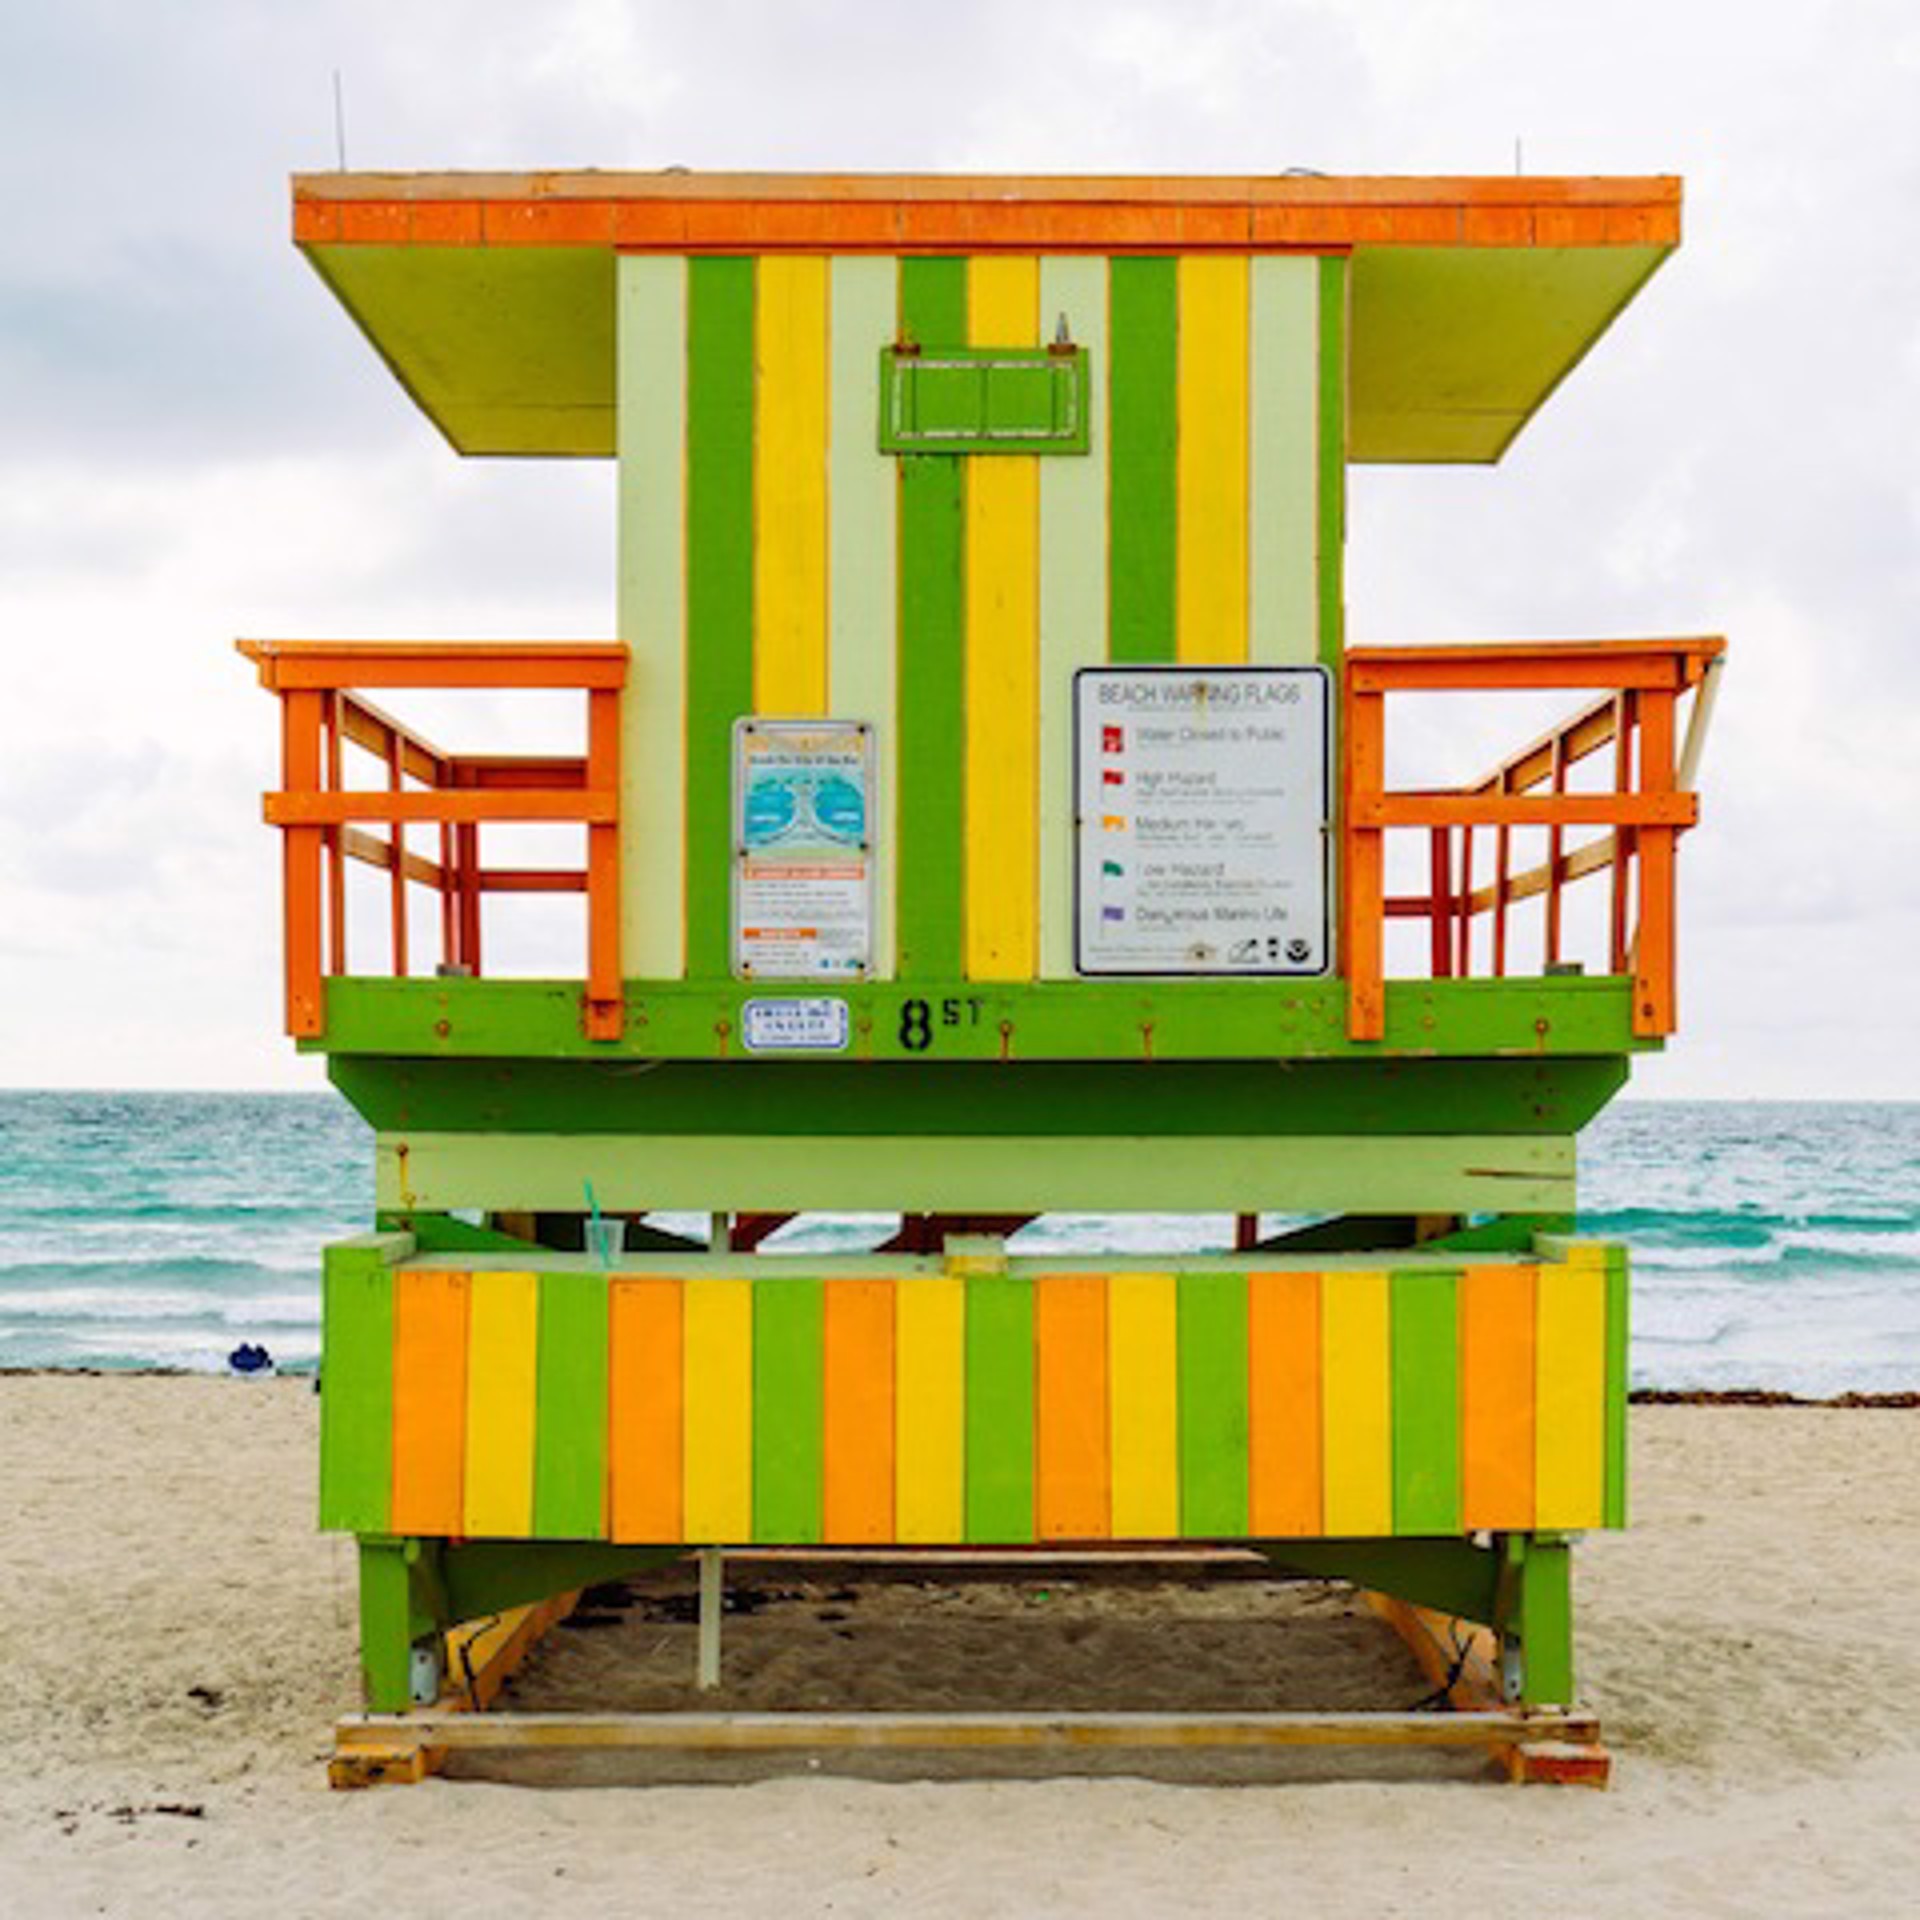 8th Street Lifeguard Stand-Back View by Peter Mendelson